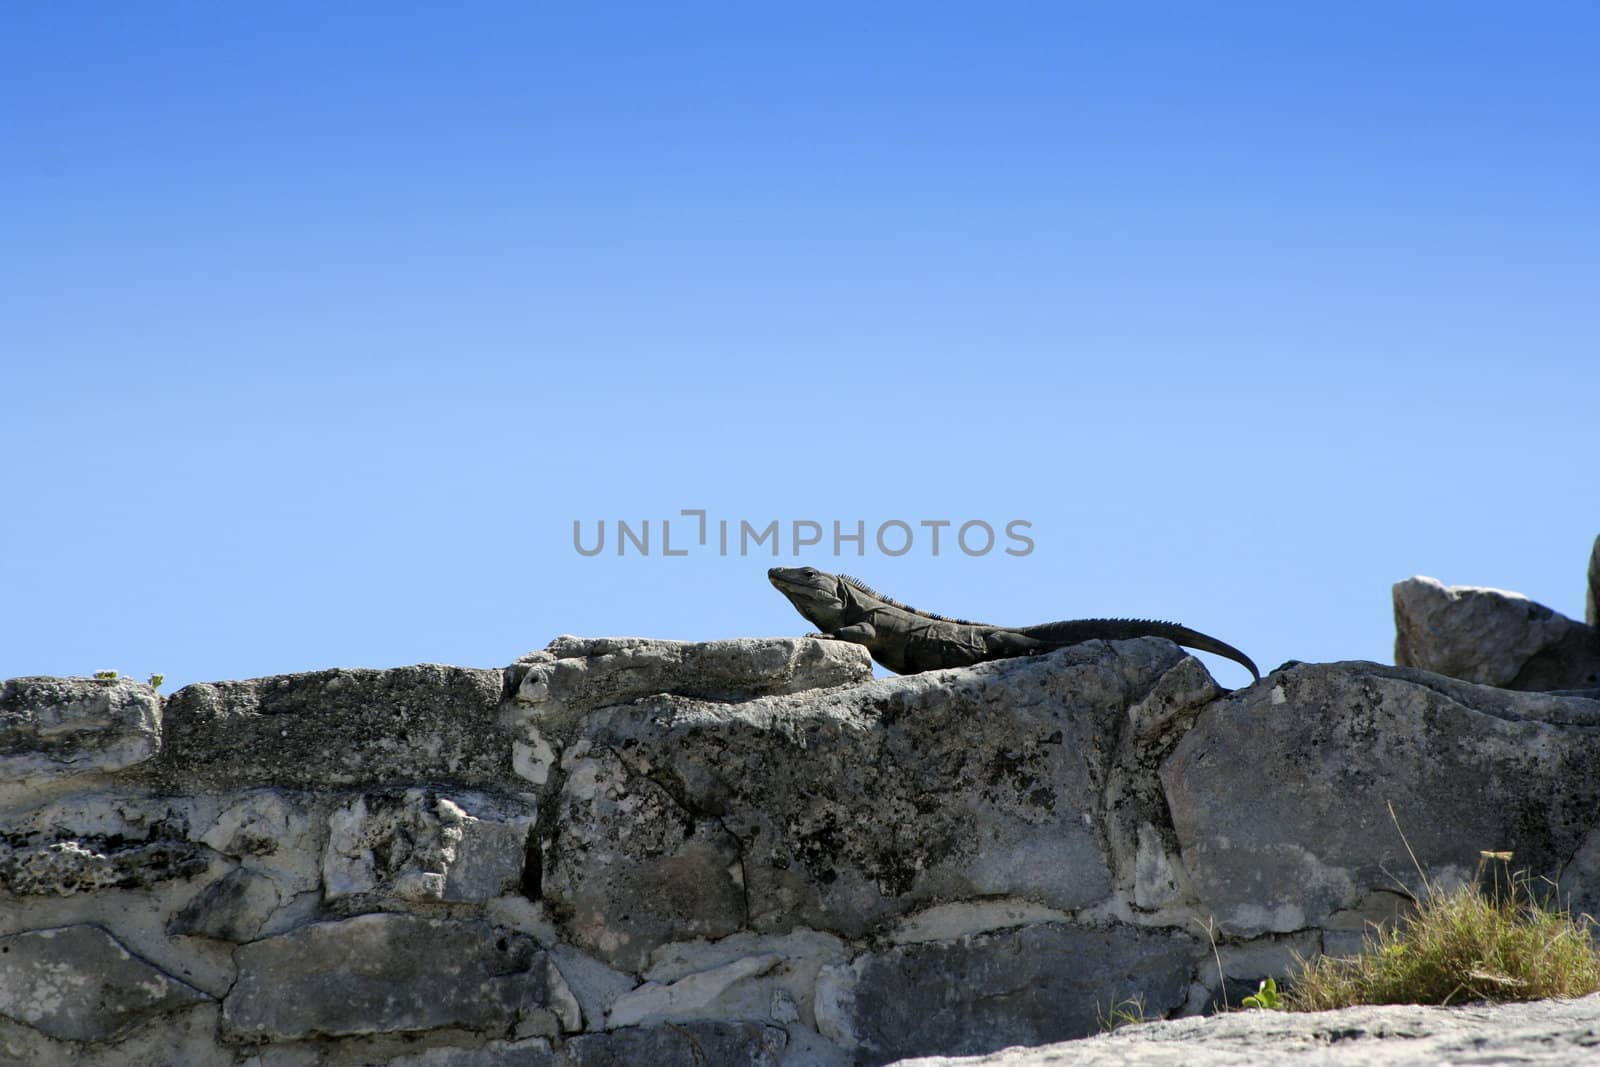 Lizard , reptile at one of the  ruins in tulum mexico
